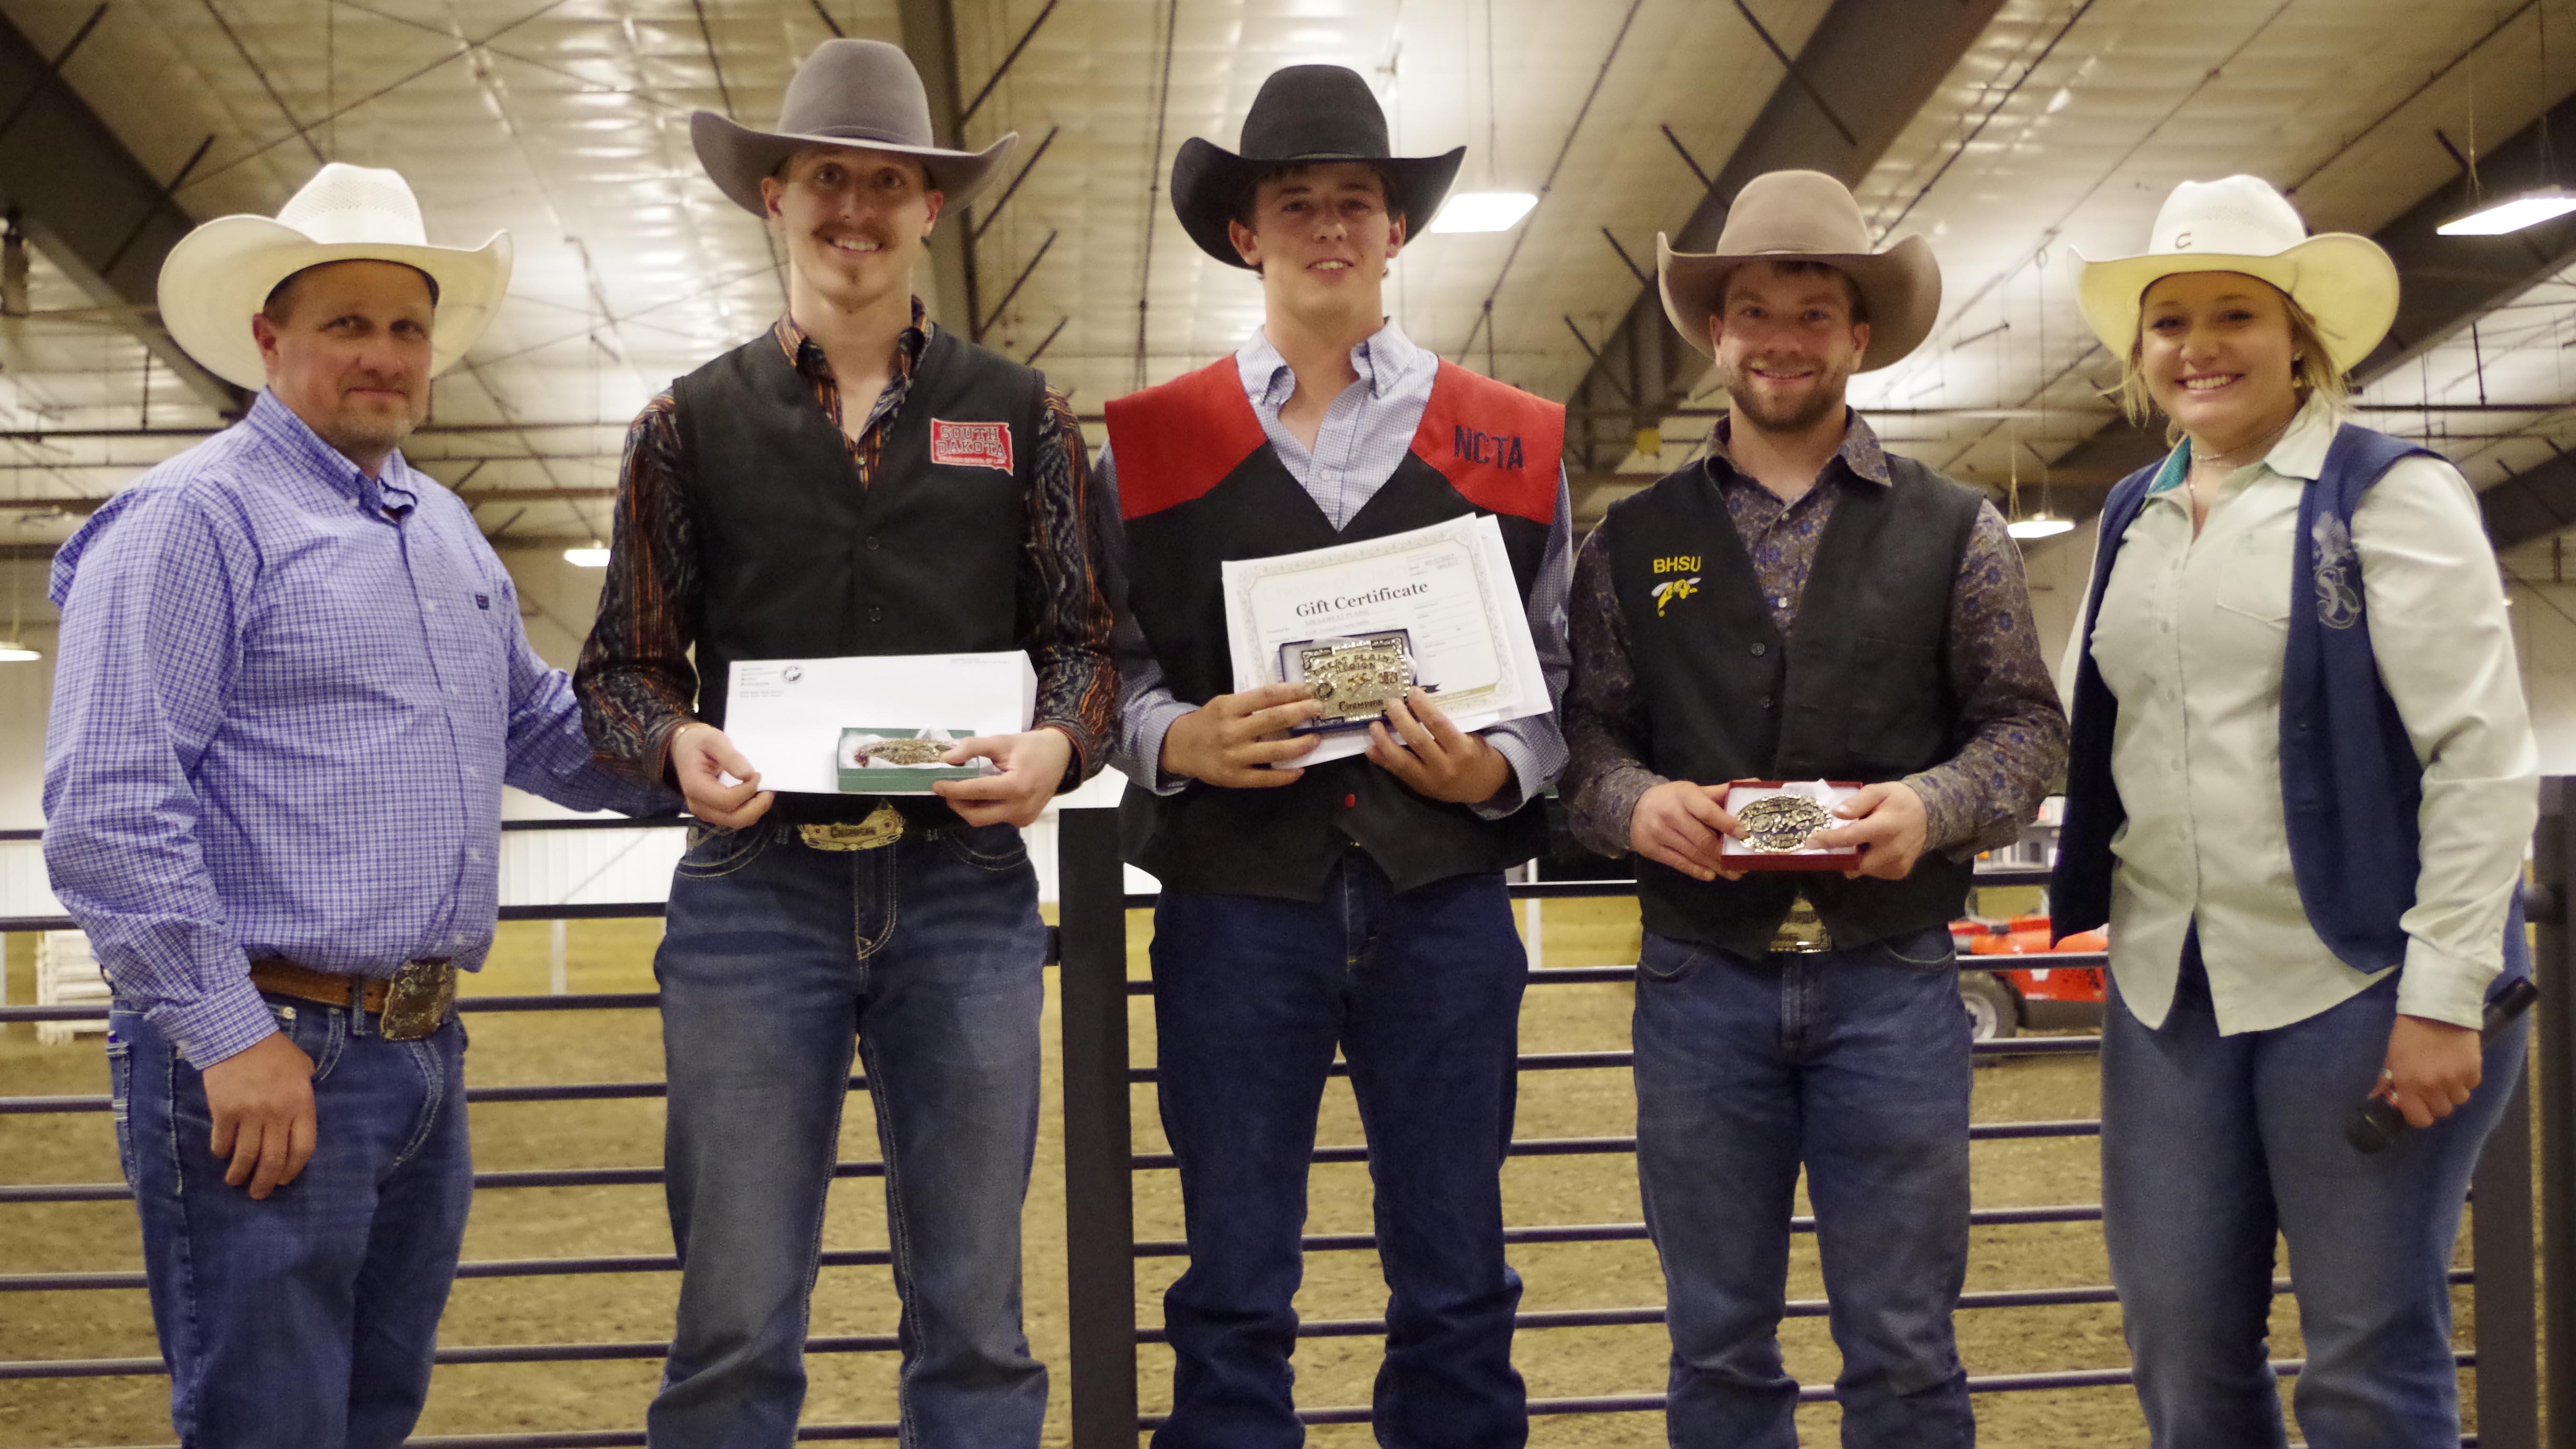 NCTA Aggie Rodeo student athlete Nathan Burnett of Shelton, Nebraska, center, won the Great Plains Region Saddle Bronc Riding title of the National Intercollegiate Rodeo Association. L-R, Ron Skovly South Dakota State University Rodeo Coach and GP Region Faculty Director; Paden Sexton, 2nd place, Nathan Burnett, regional champion; Tayte Goodman, 3rd place, and Jade Boote, Dickinson State, GP Student Director. (Courtesy photo by Penny Skovly) 